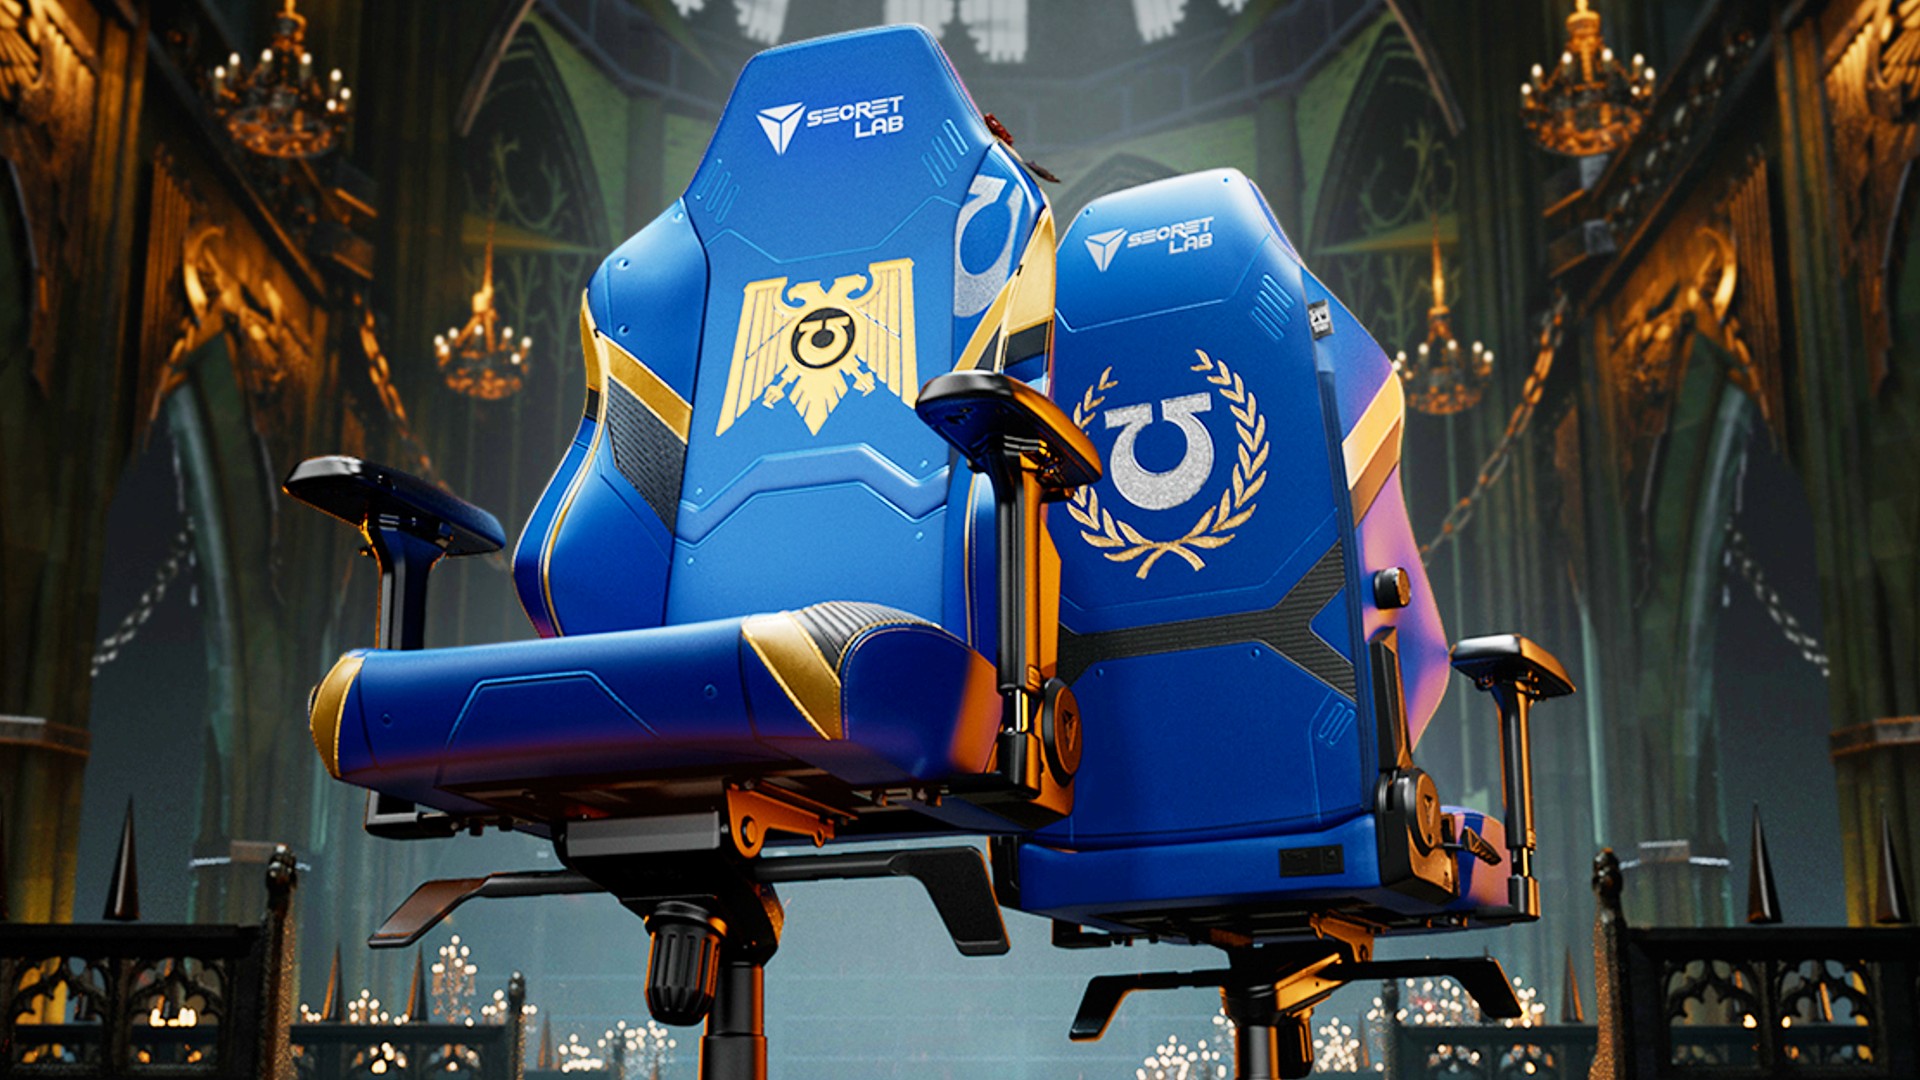 Secretlab just dropped a Warhammer 40,000 gaming chair, and we love it